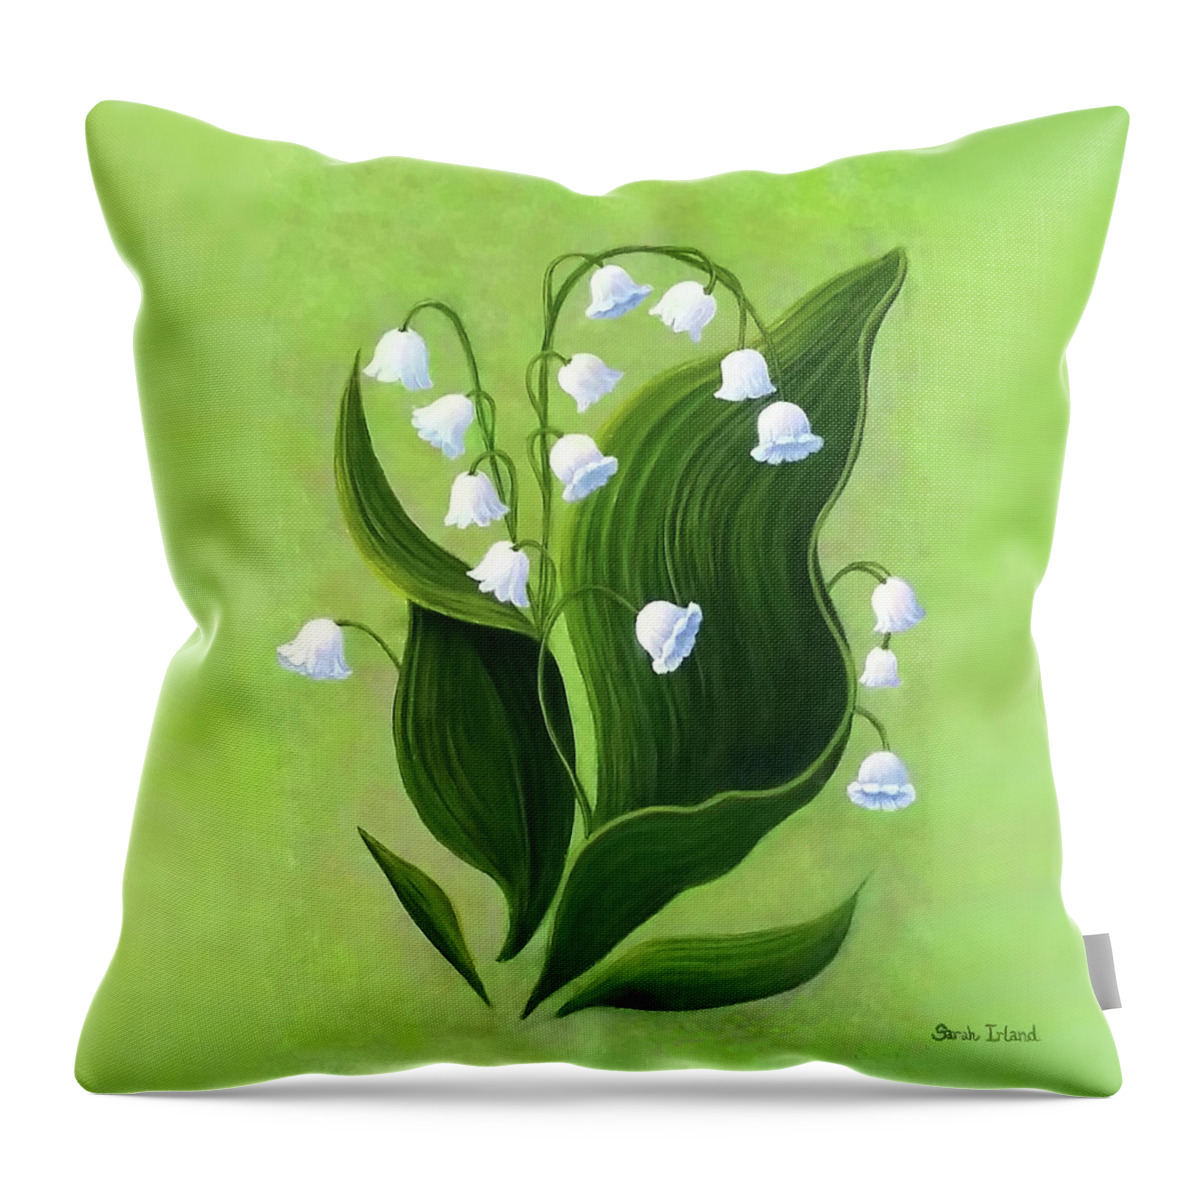 Portrait Throw Pillow featuring the painting Megan's Lily of the Valley by Sarah Irland